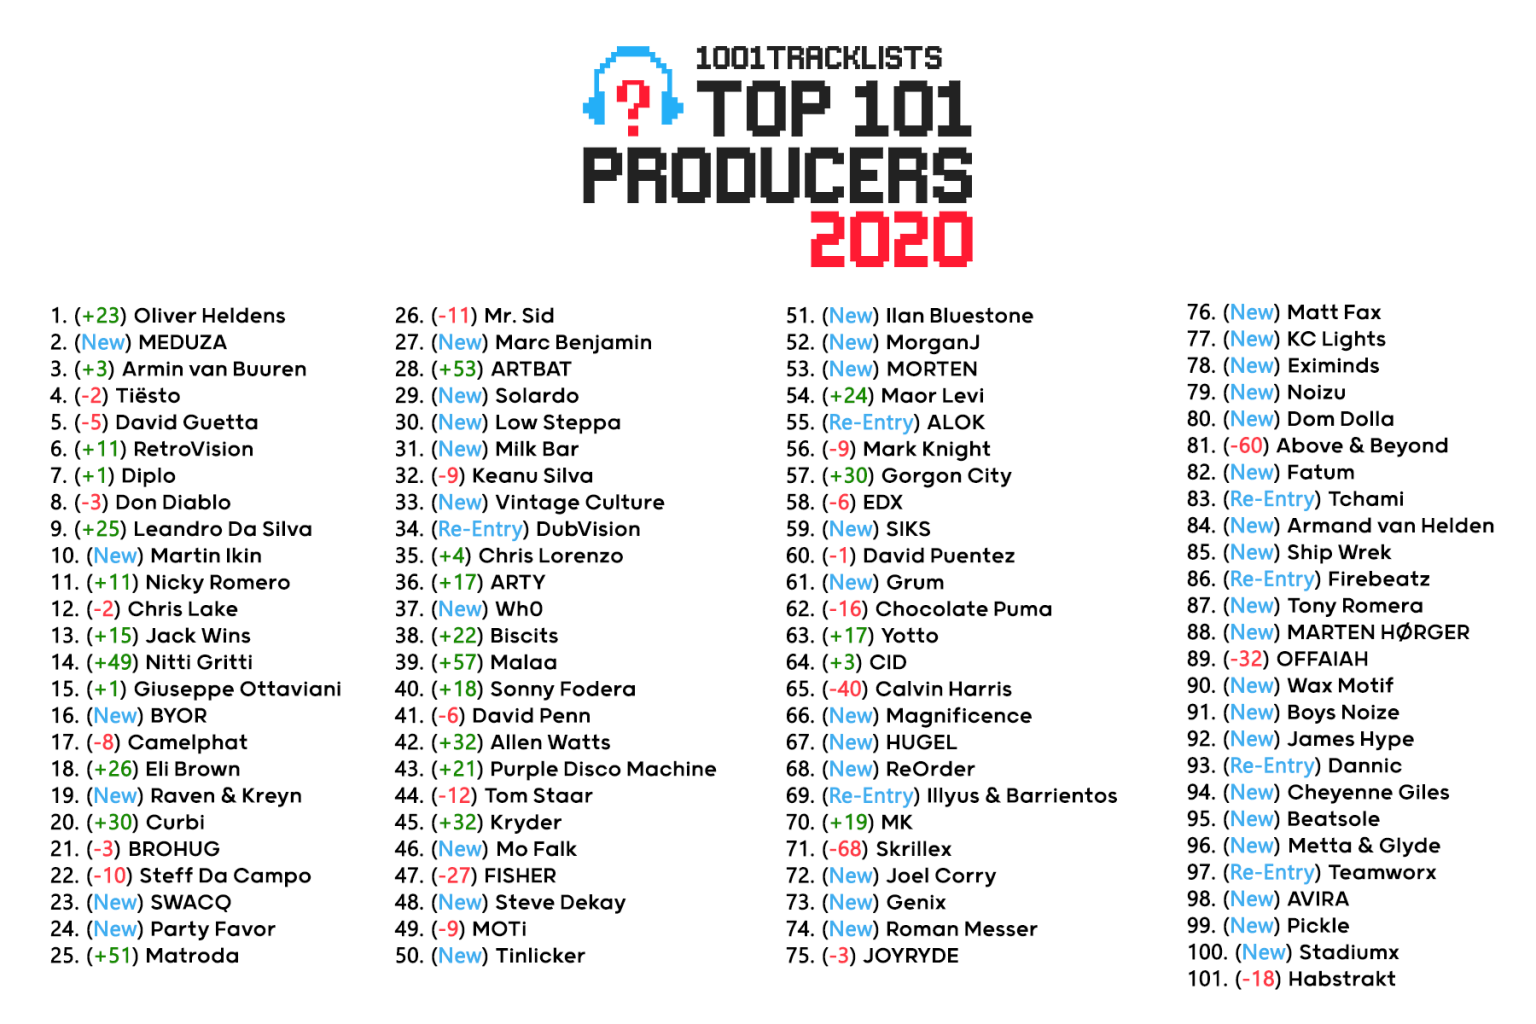 1001tracklists Top 101 Producers 2020